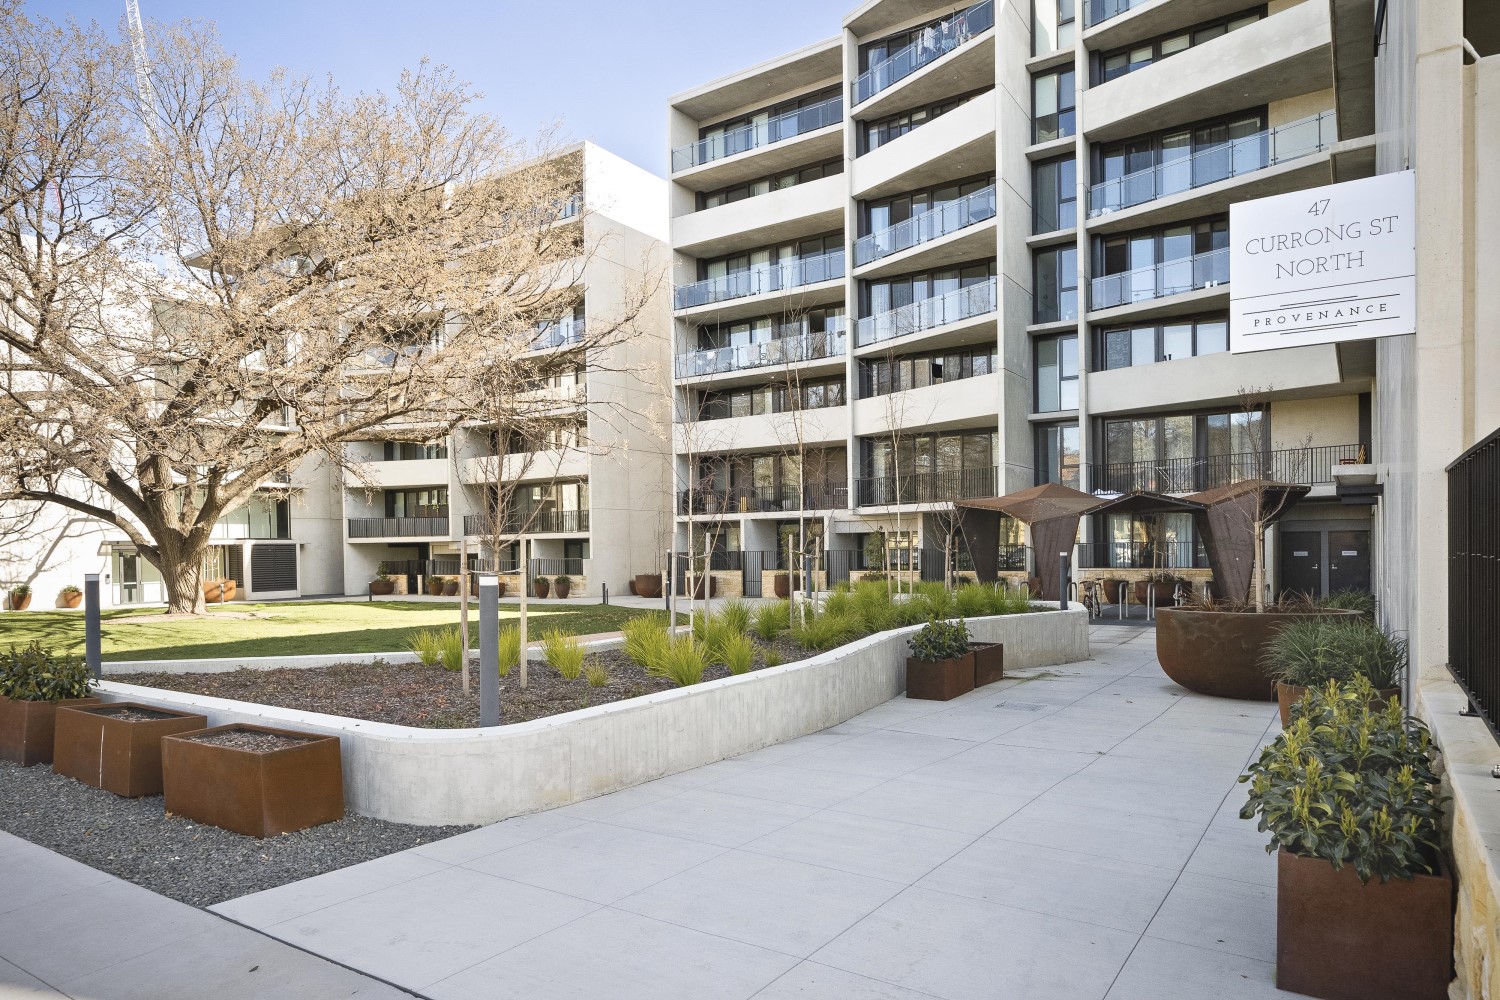 Exterior - One Bedroom Apartment - Founders Lane Apartments - Canberra - Urban Rest